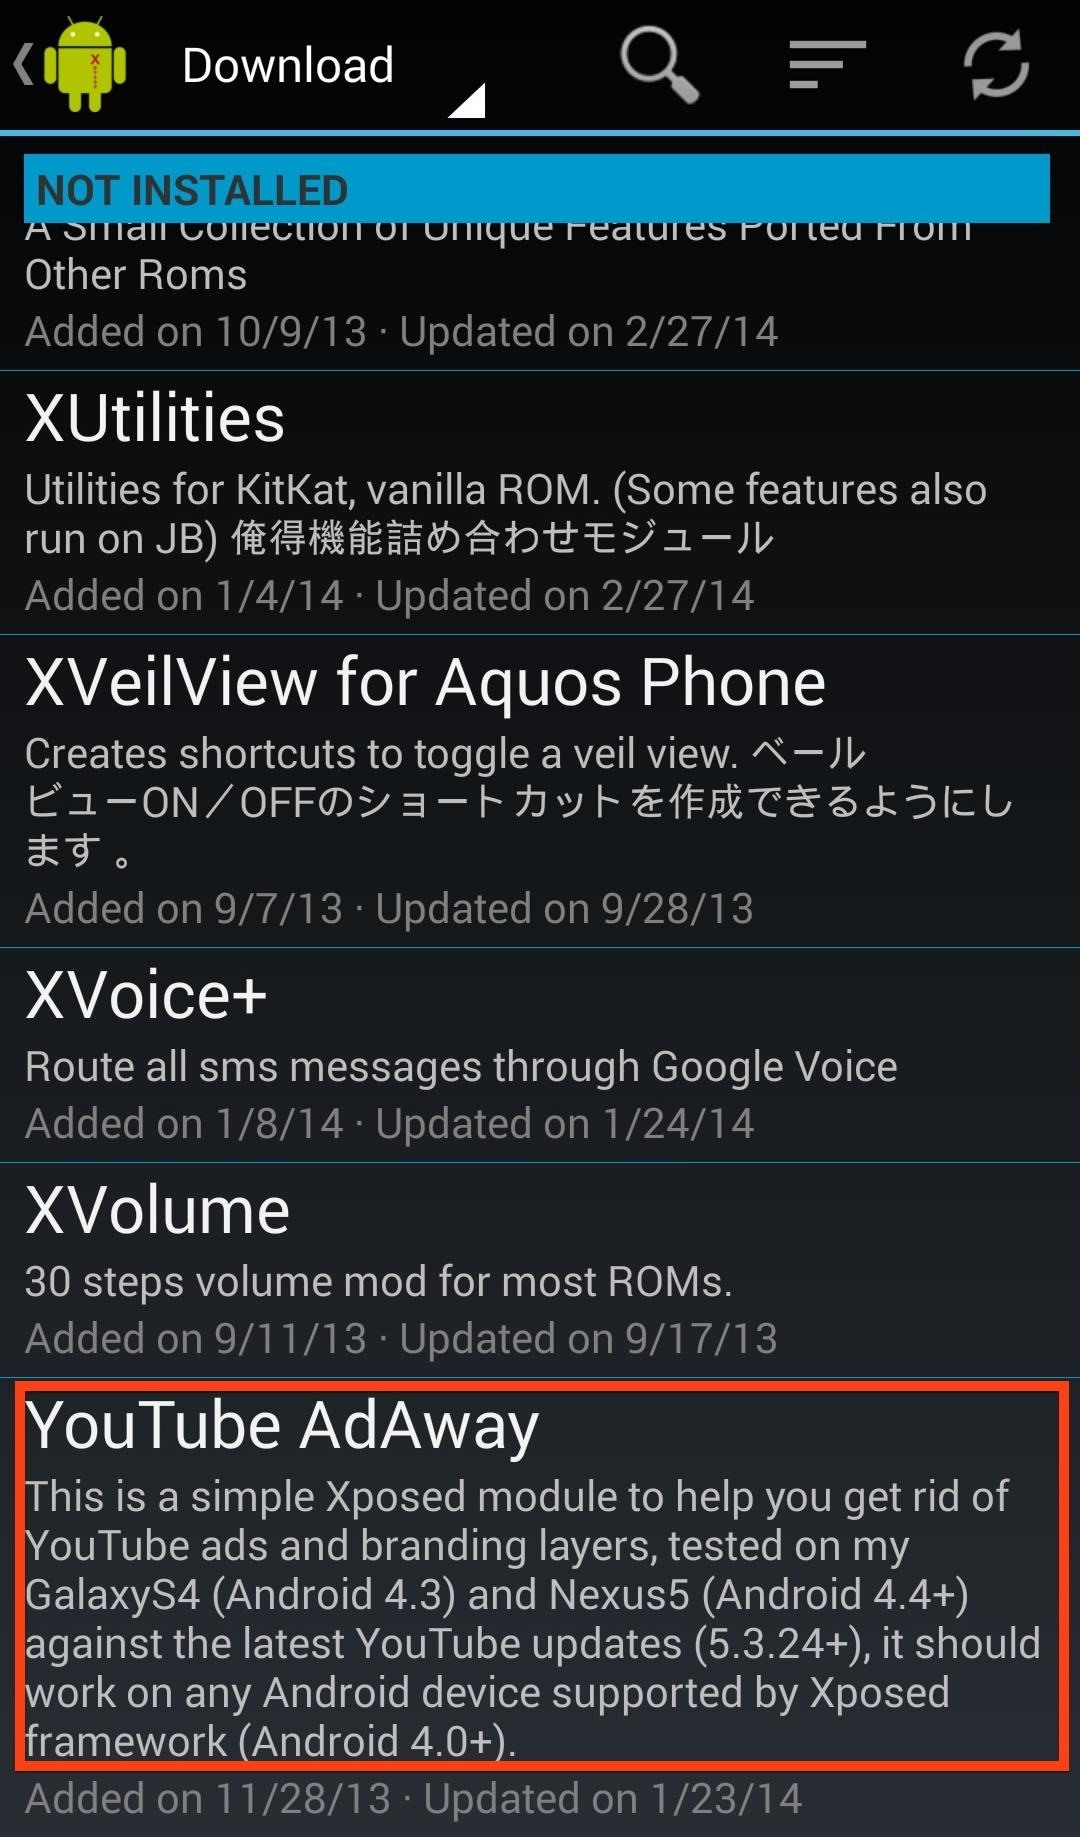 How to Get Rid of Annoying YouTube Ads on Your HTC One